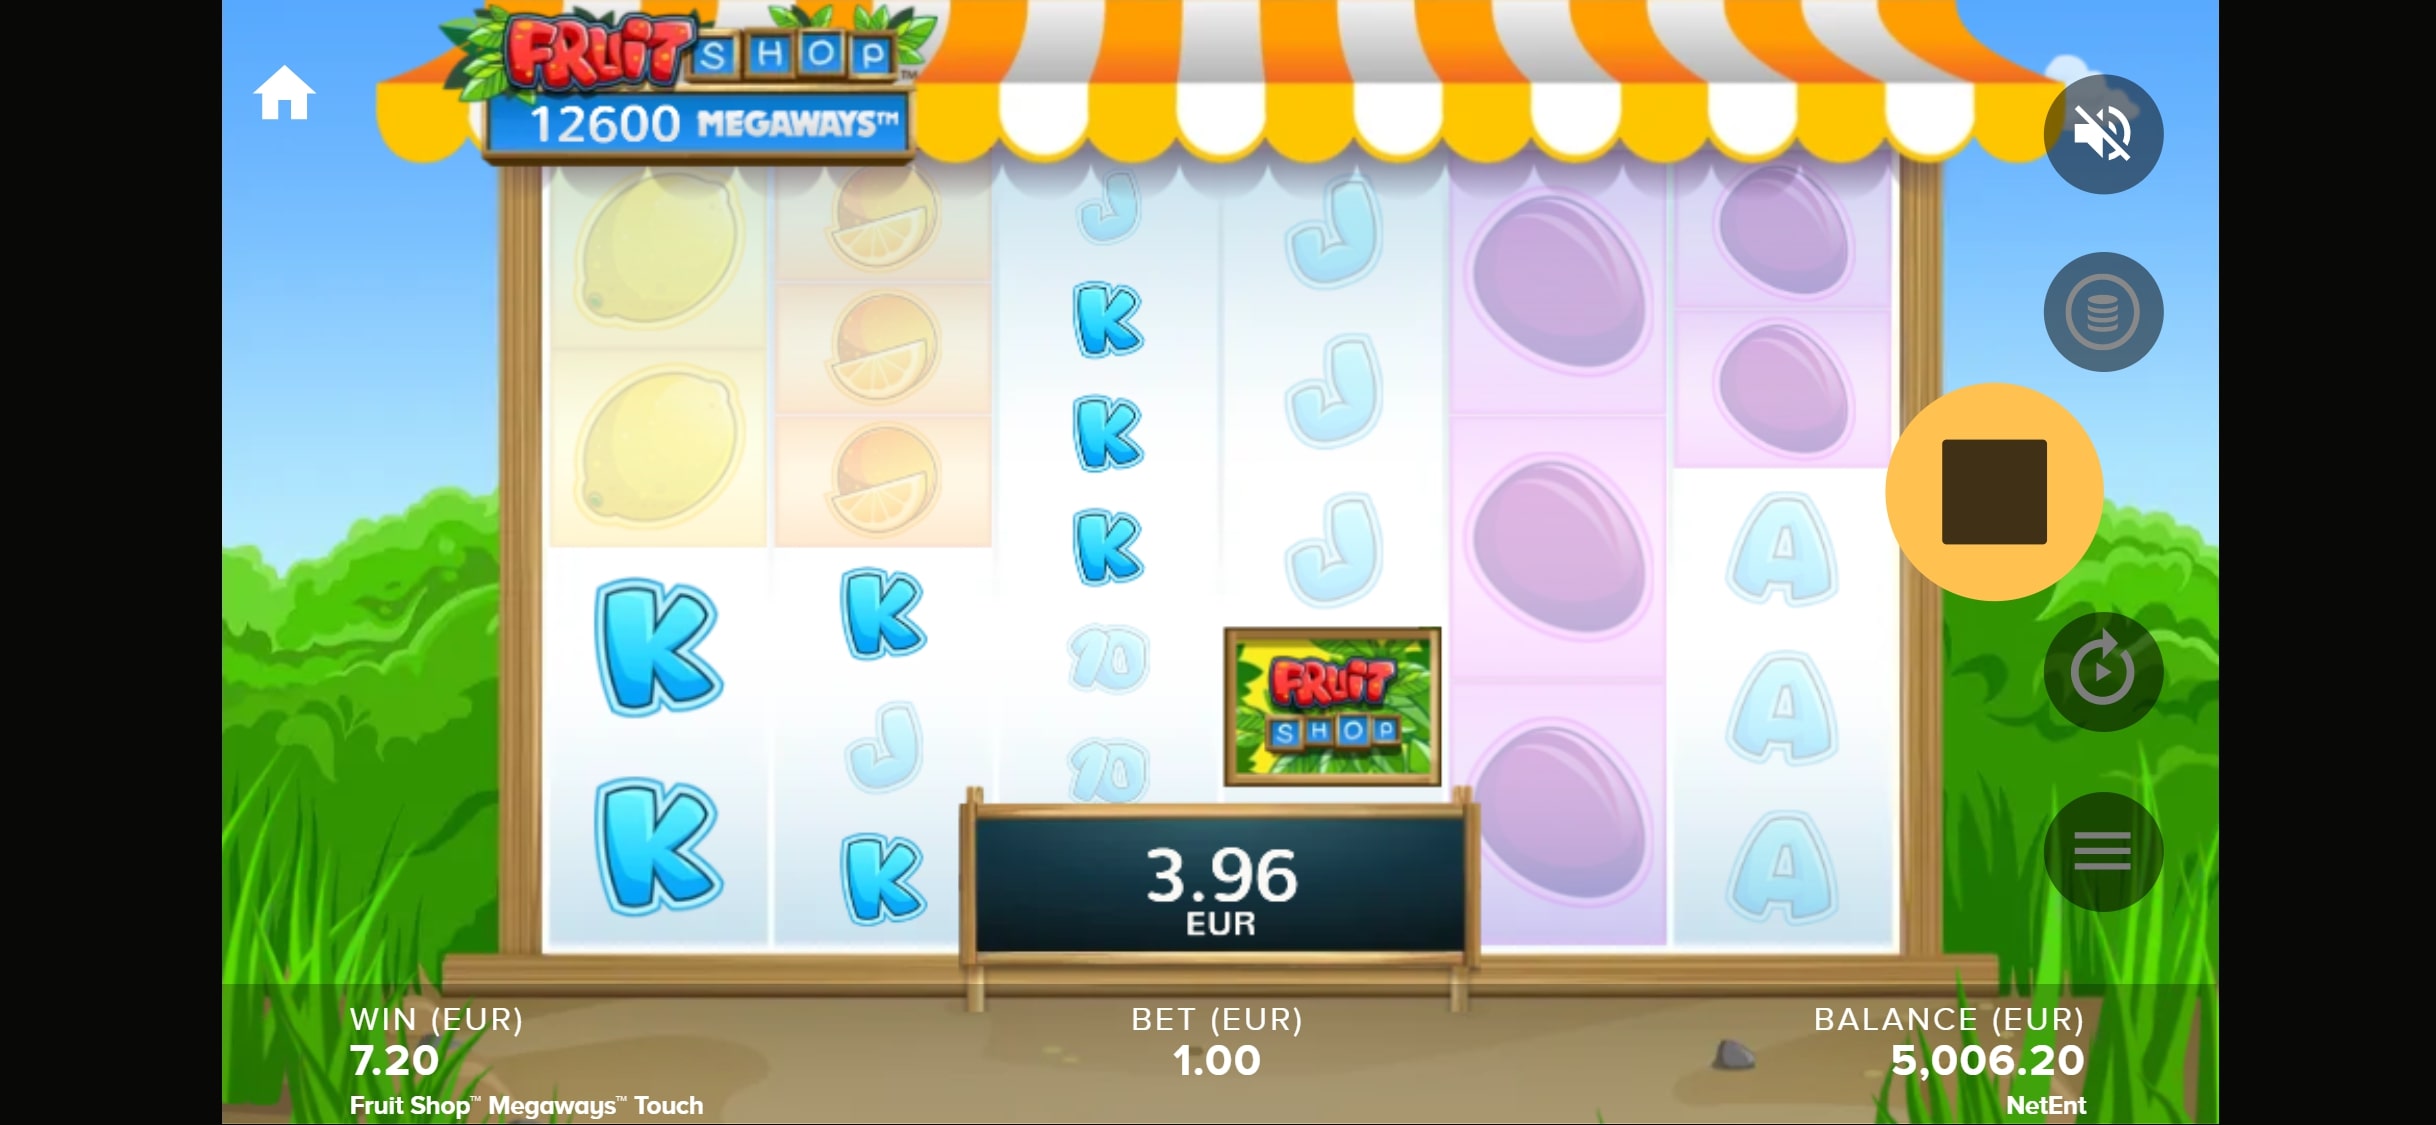 Betroom24 Mobile Slot Games Review